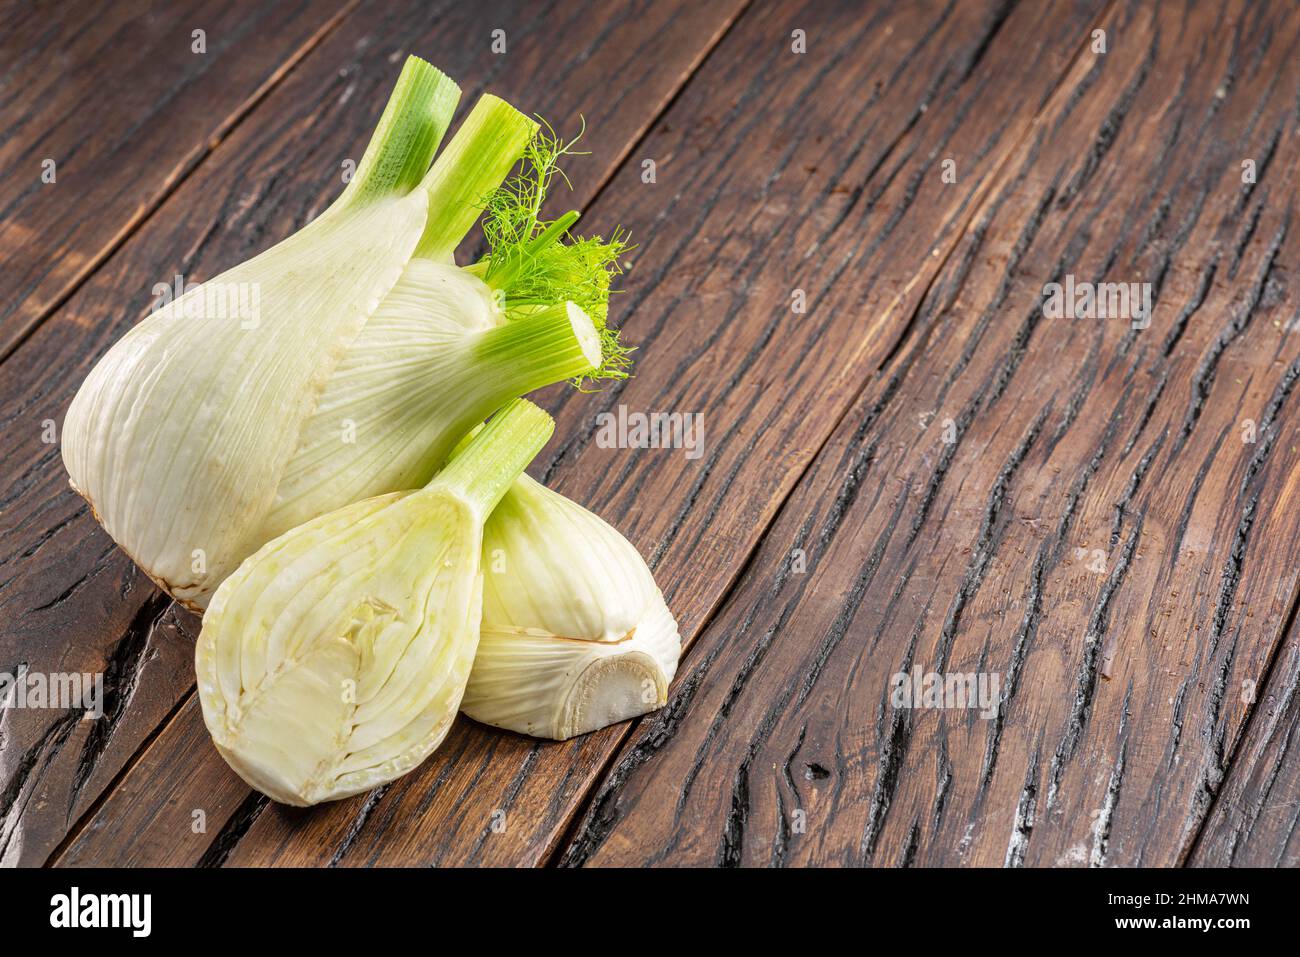 Florence fennel bulbs on aged wood background. Stock Photo